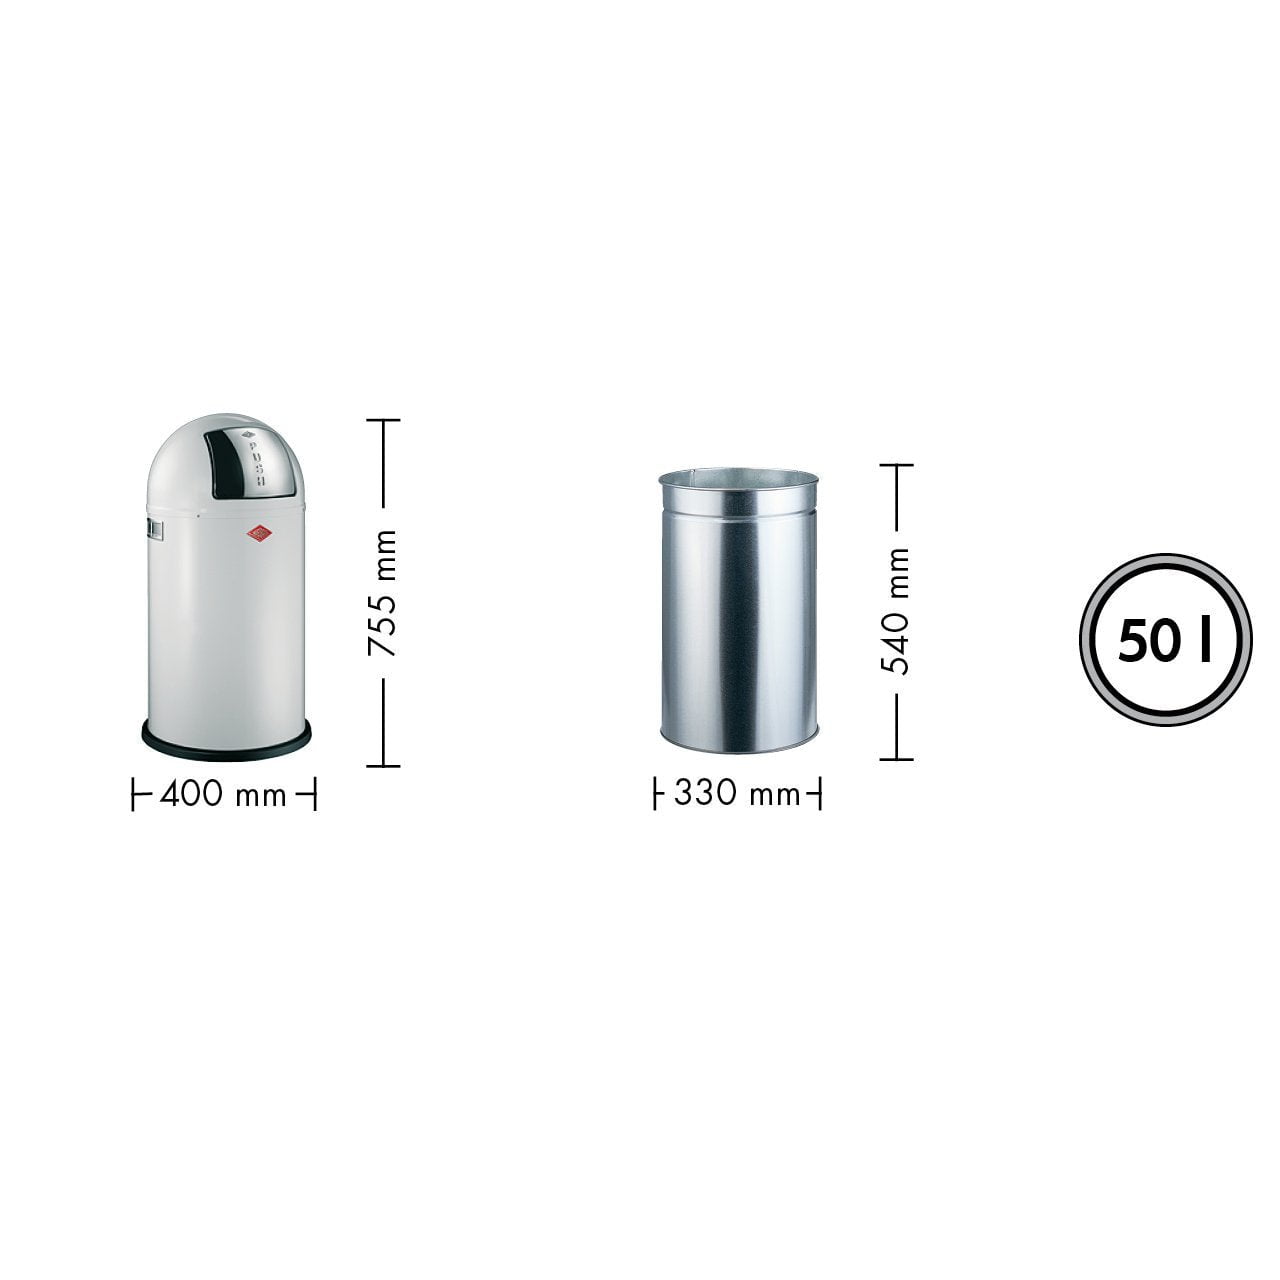 Wesco Pushboy 50 Litres, Almond